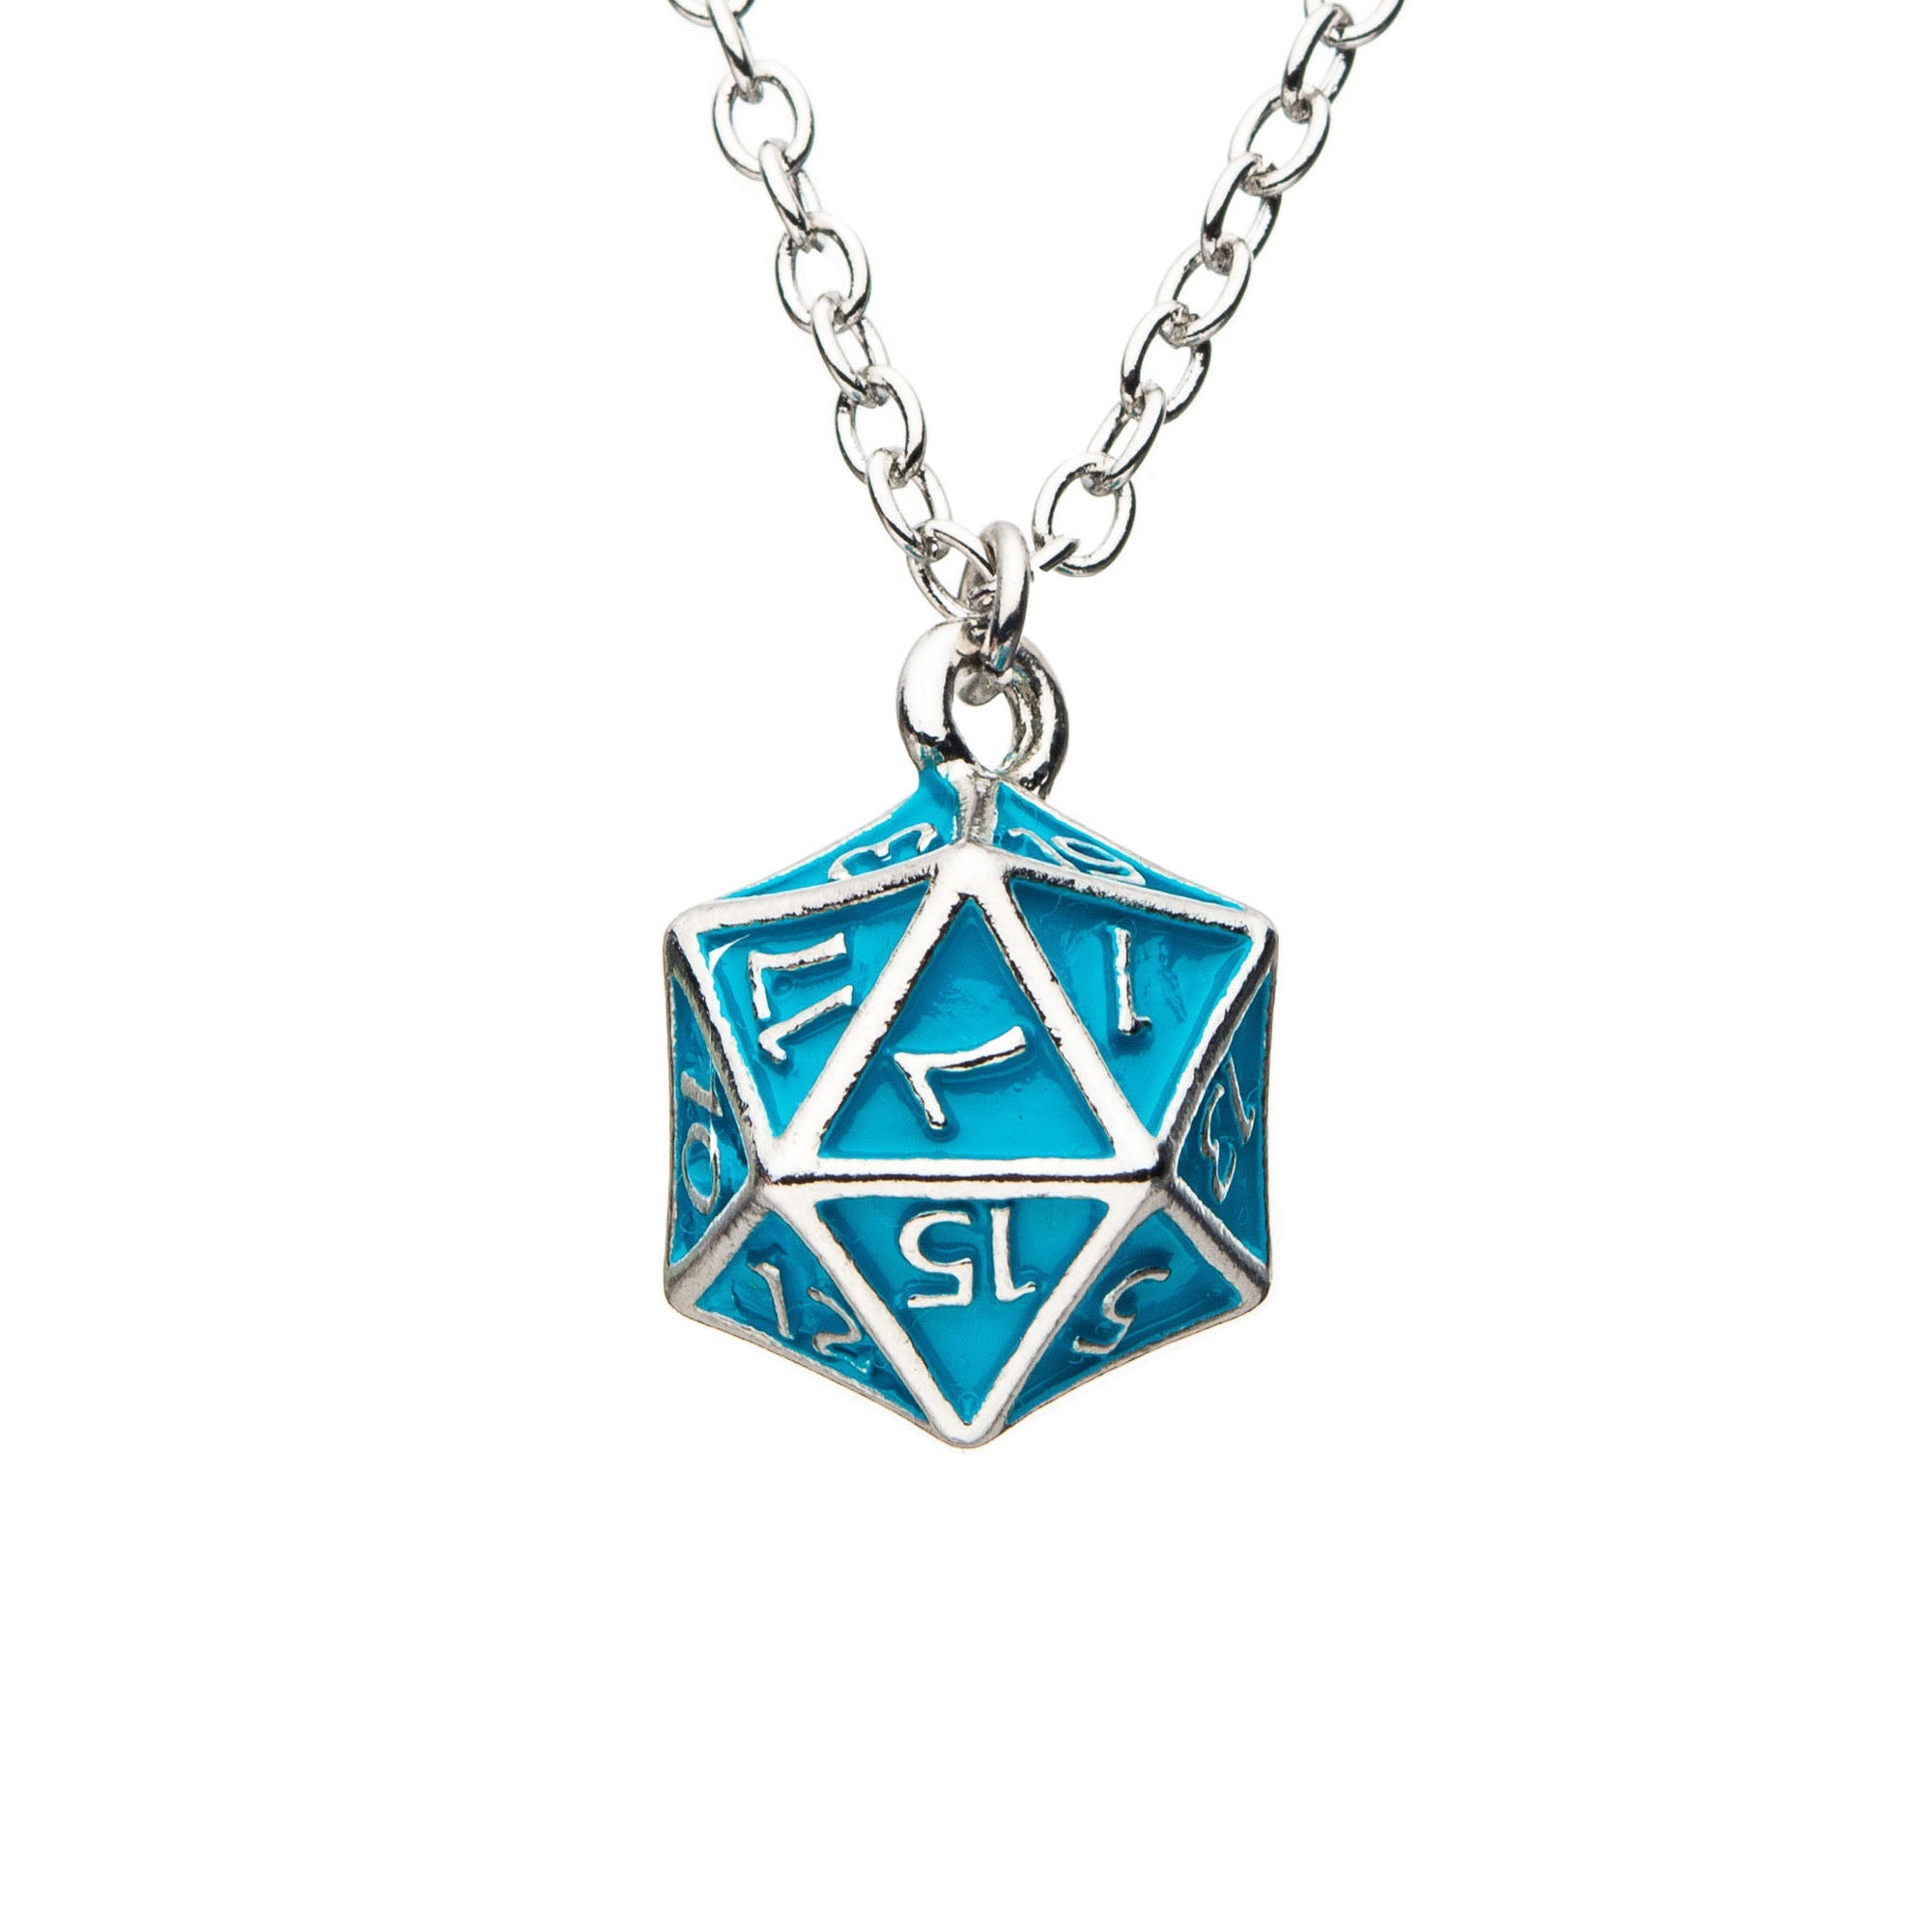 Wizard D20 Character Class Dice Necklace with Spellbook Charm - Blue D&D Dice Pendant Gold Color